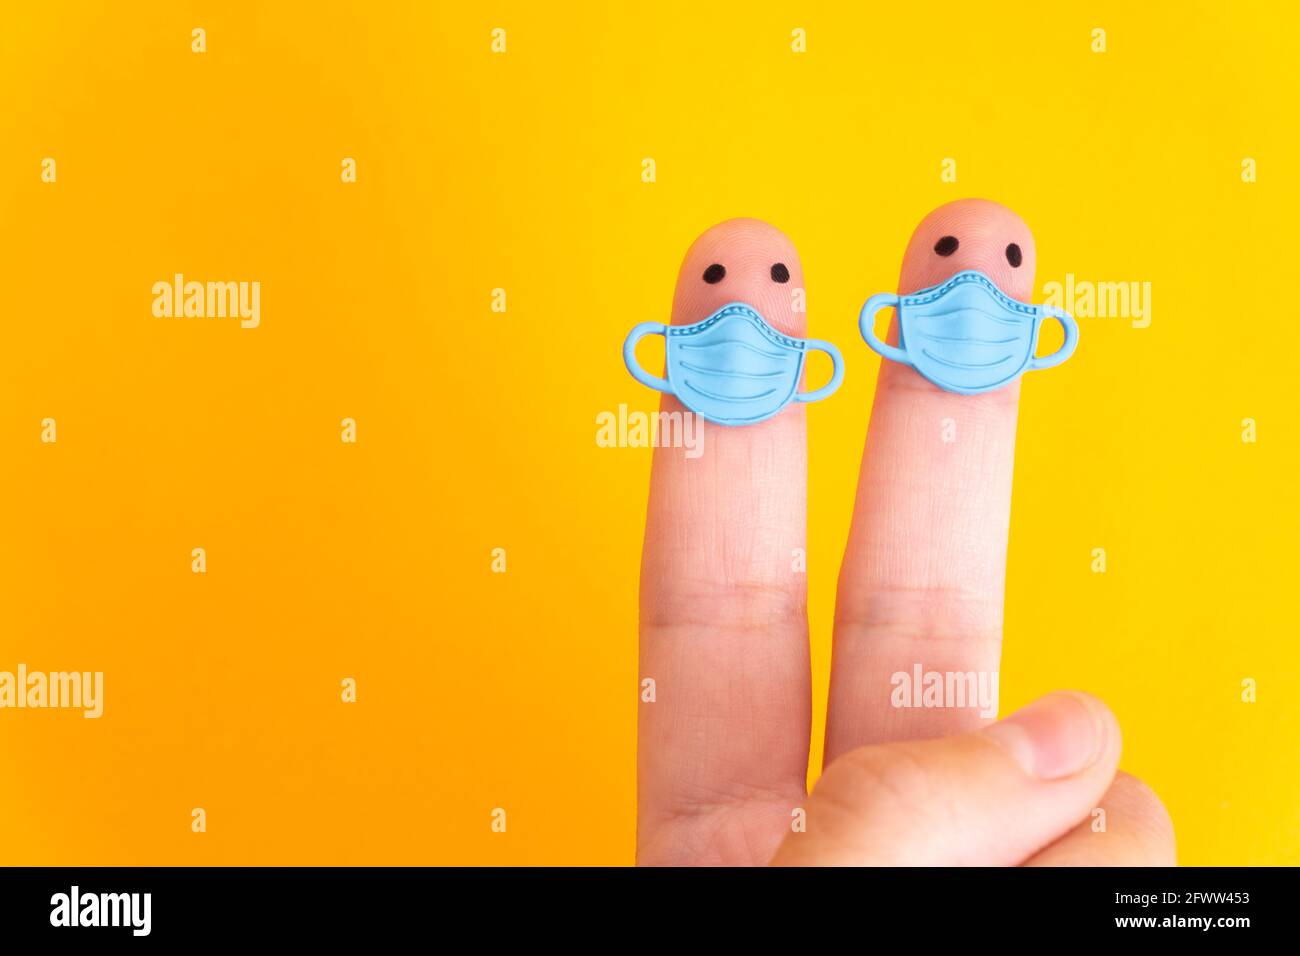 Two finger characters wearing blue face masks isolated on yellow background Stock Photo